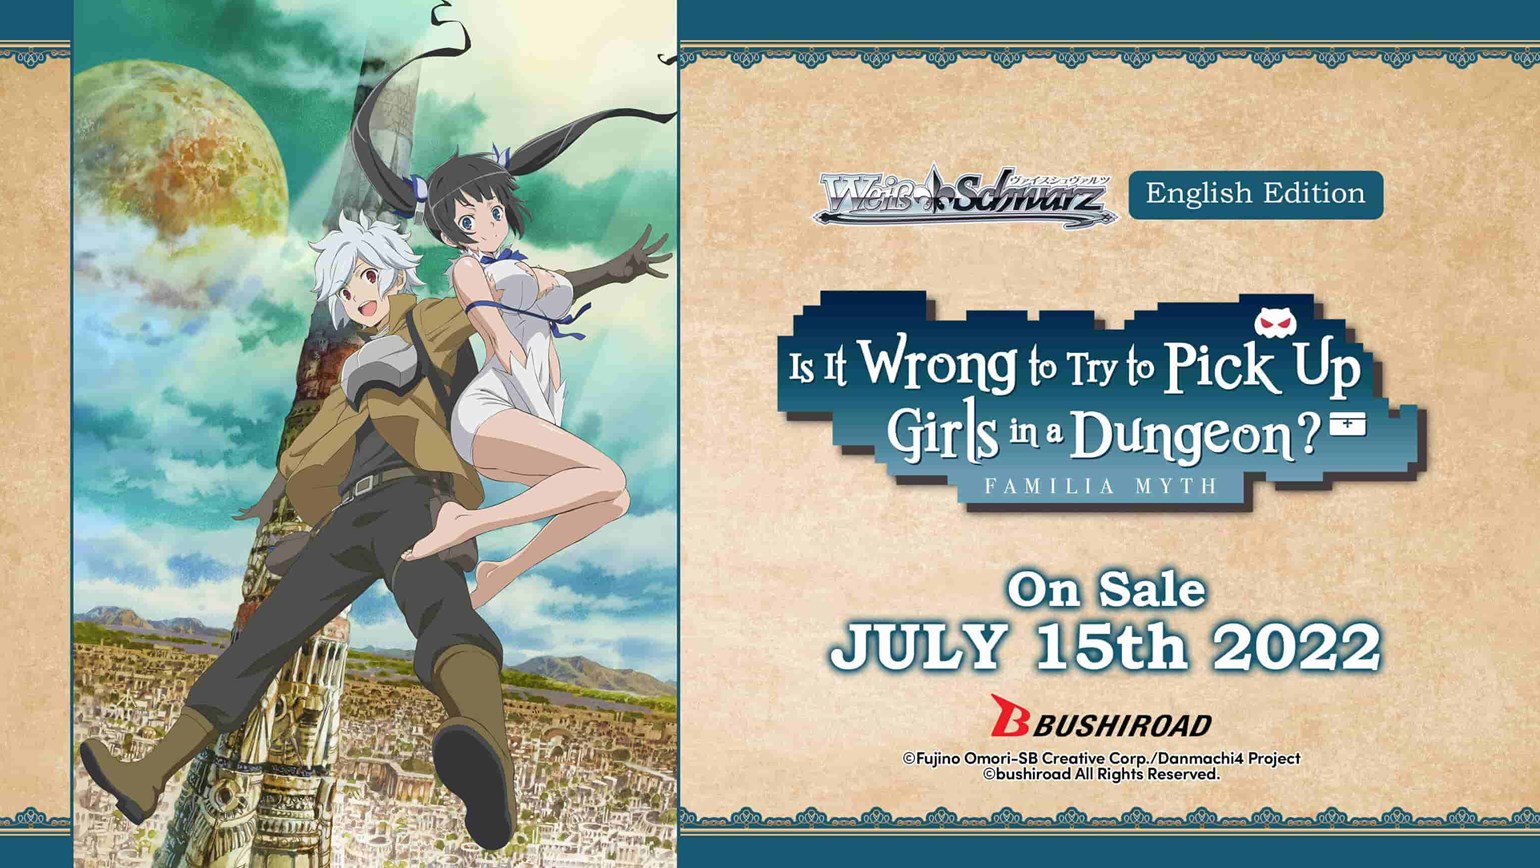 Weiss Schwarz: Is It Wrong to Try to Pick Up Girls in a Dungeon?